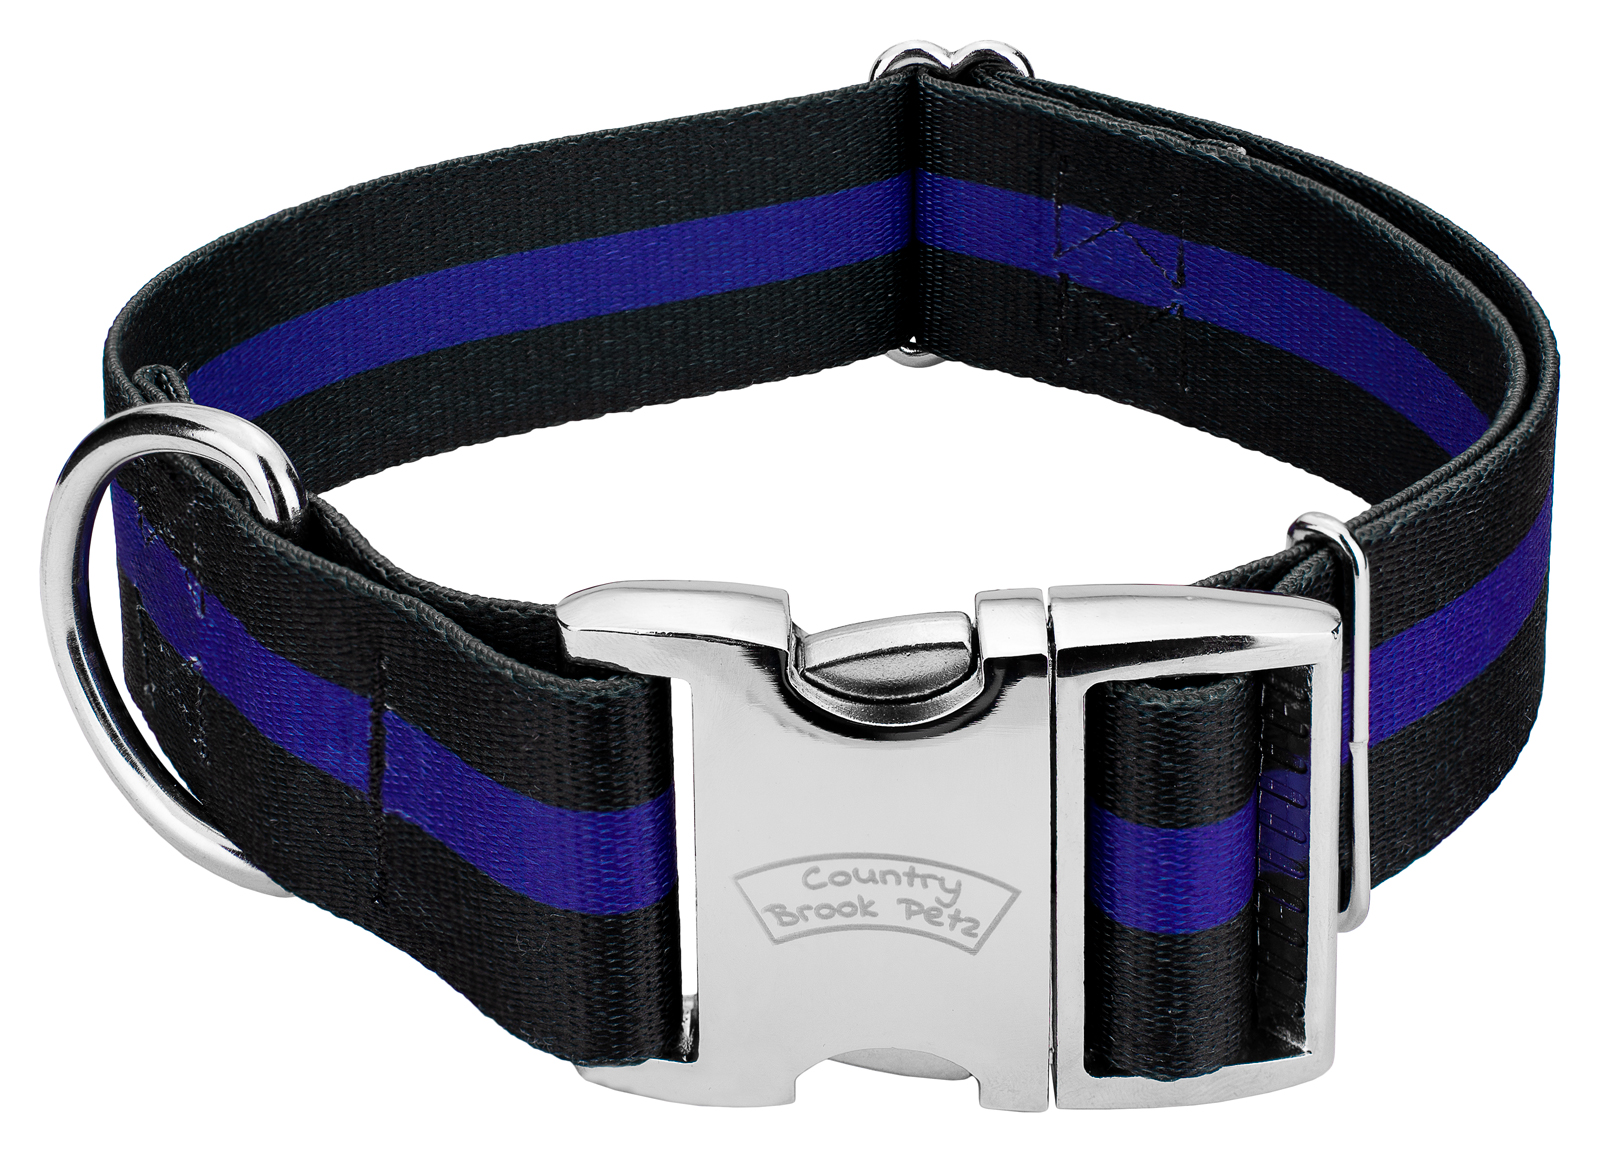 Country Brook Petz® 1 1/2 inch Premium Thin Blue Line Dog Collar, Extra Large - image 1 of 5